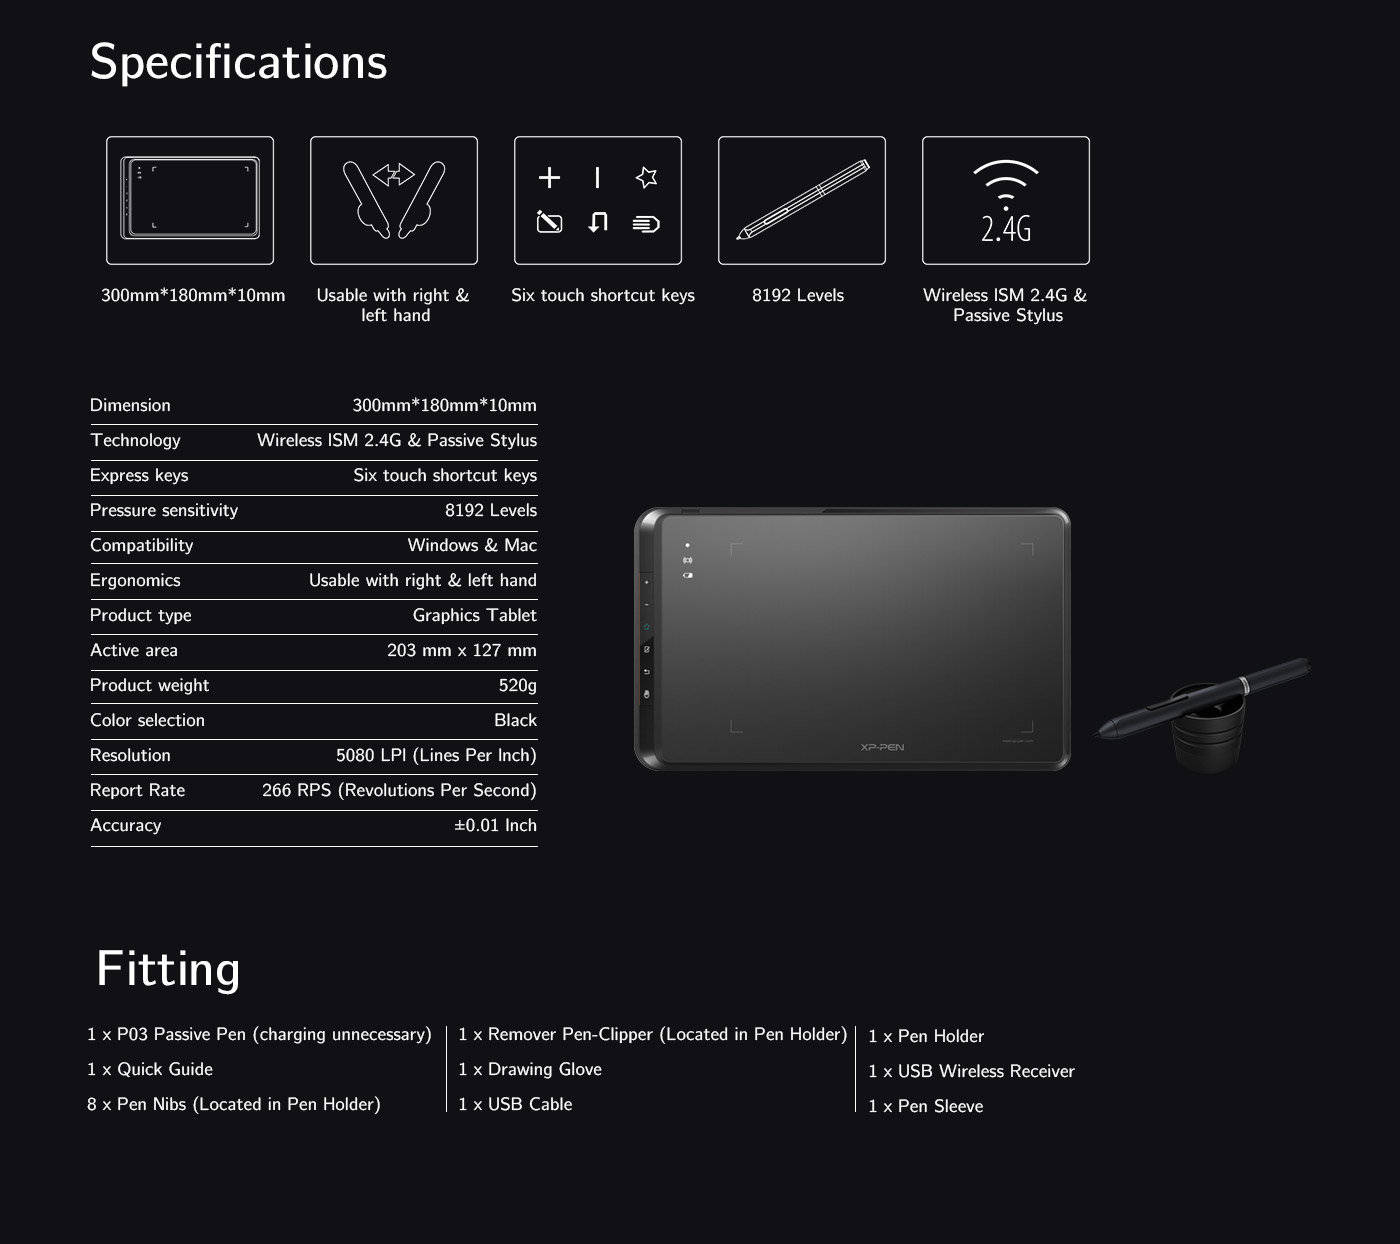 Specifications and fitting of XP-Pen Star 05 wireless drawing tablet